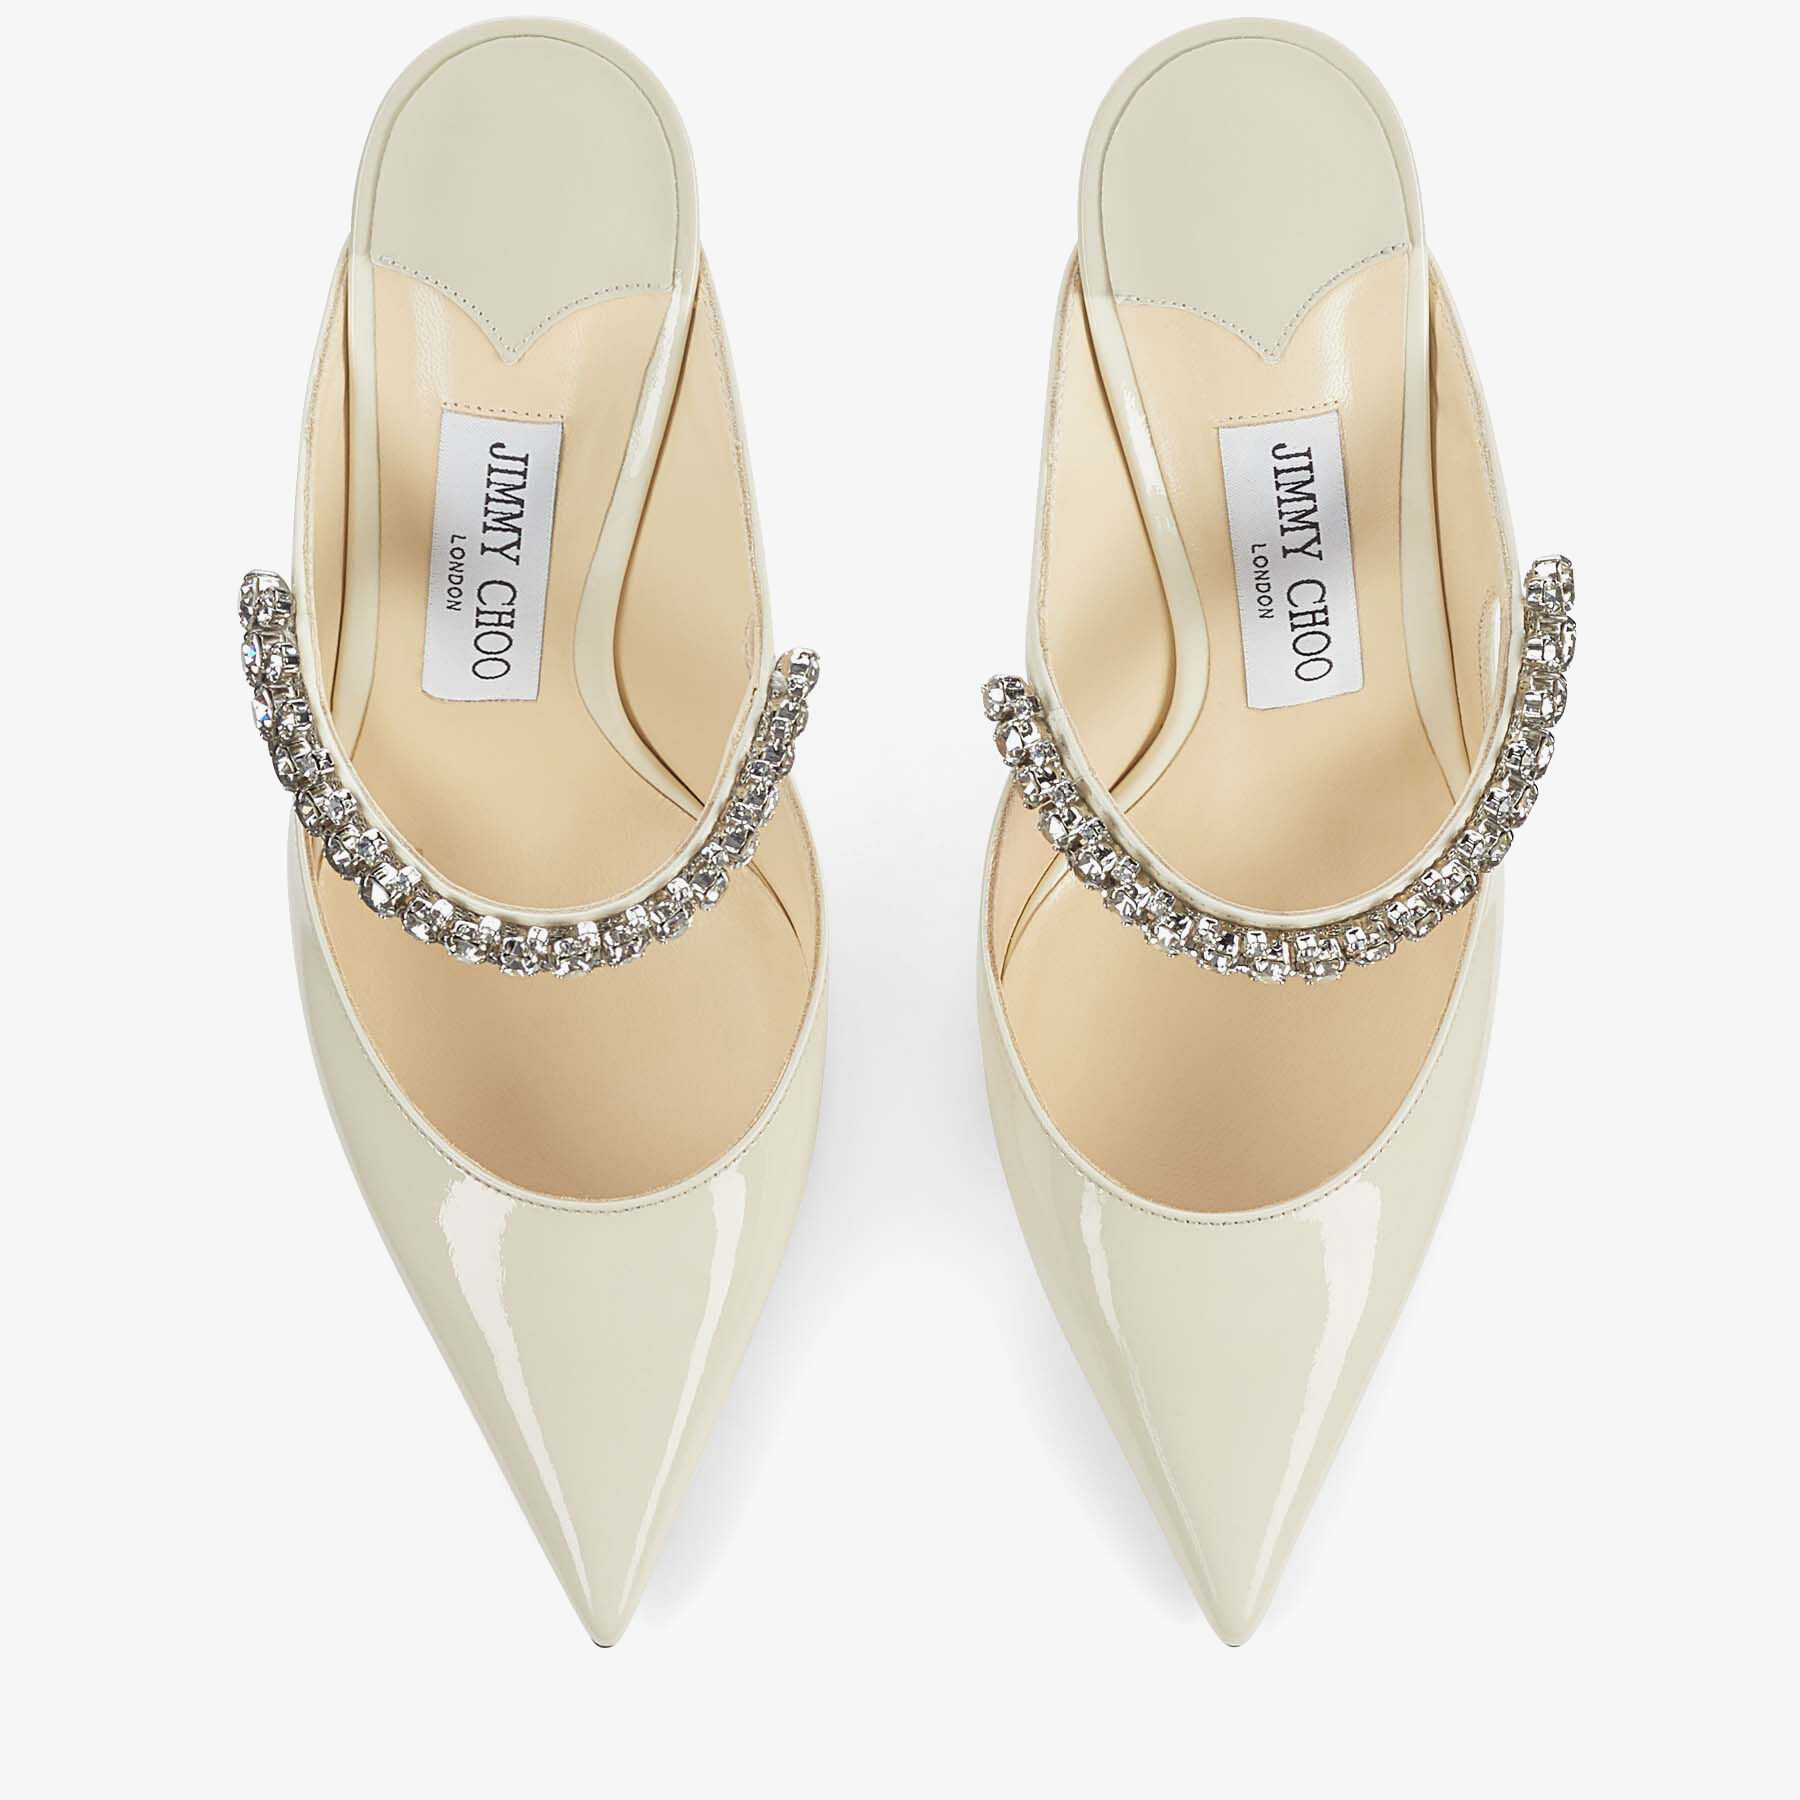 Bing 100 | Linen Patent Leather Mules with Crystal Strap | JIMMY CHOO